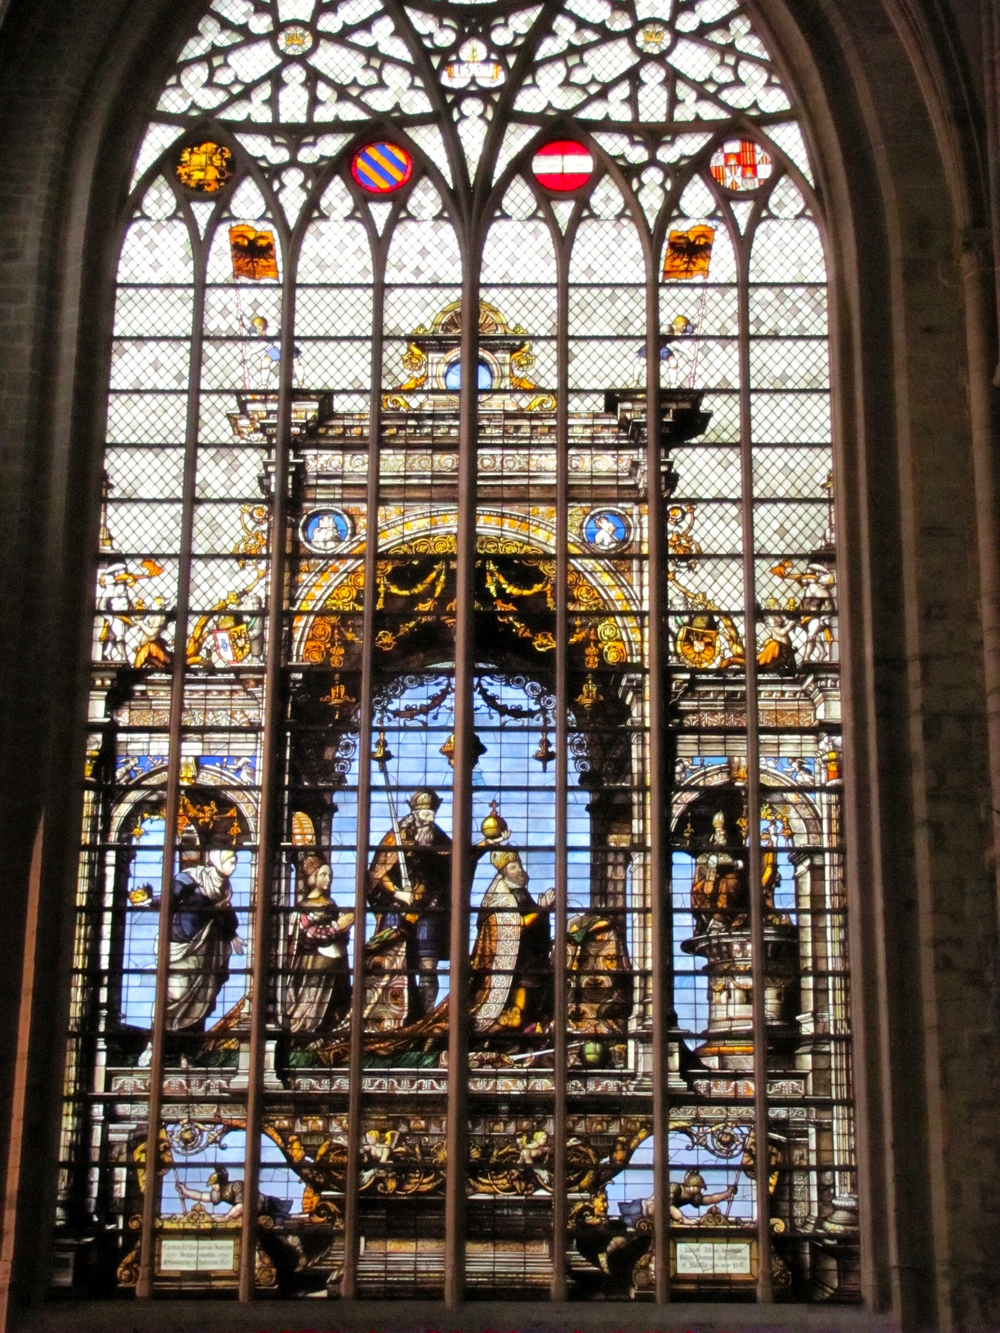  Stained glass window in the&nbsp;Basilique Nationale du Sacre-Coeur, Brussels, Belgium, VHS 2010 